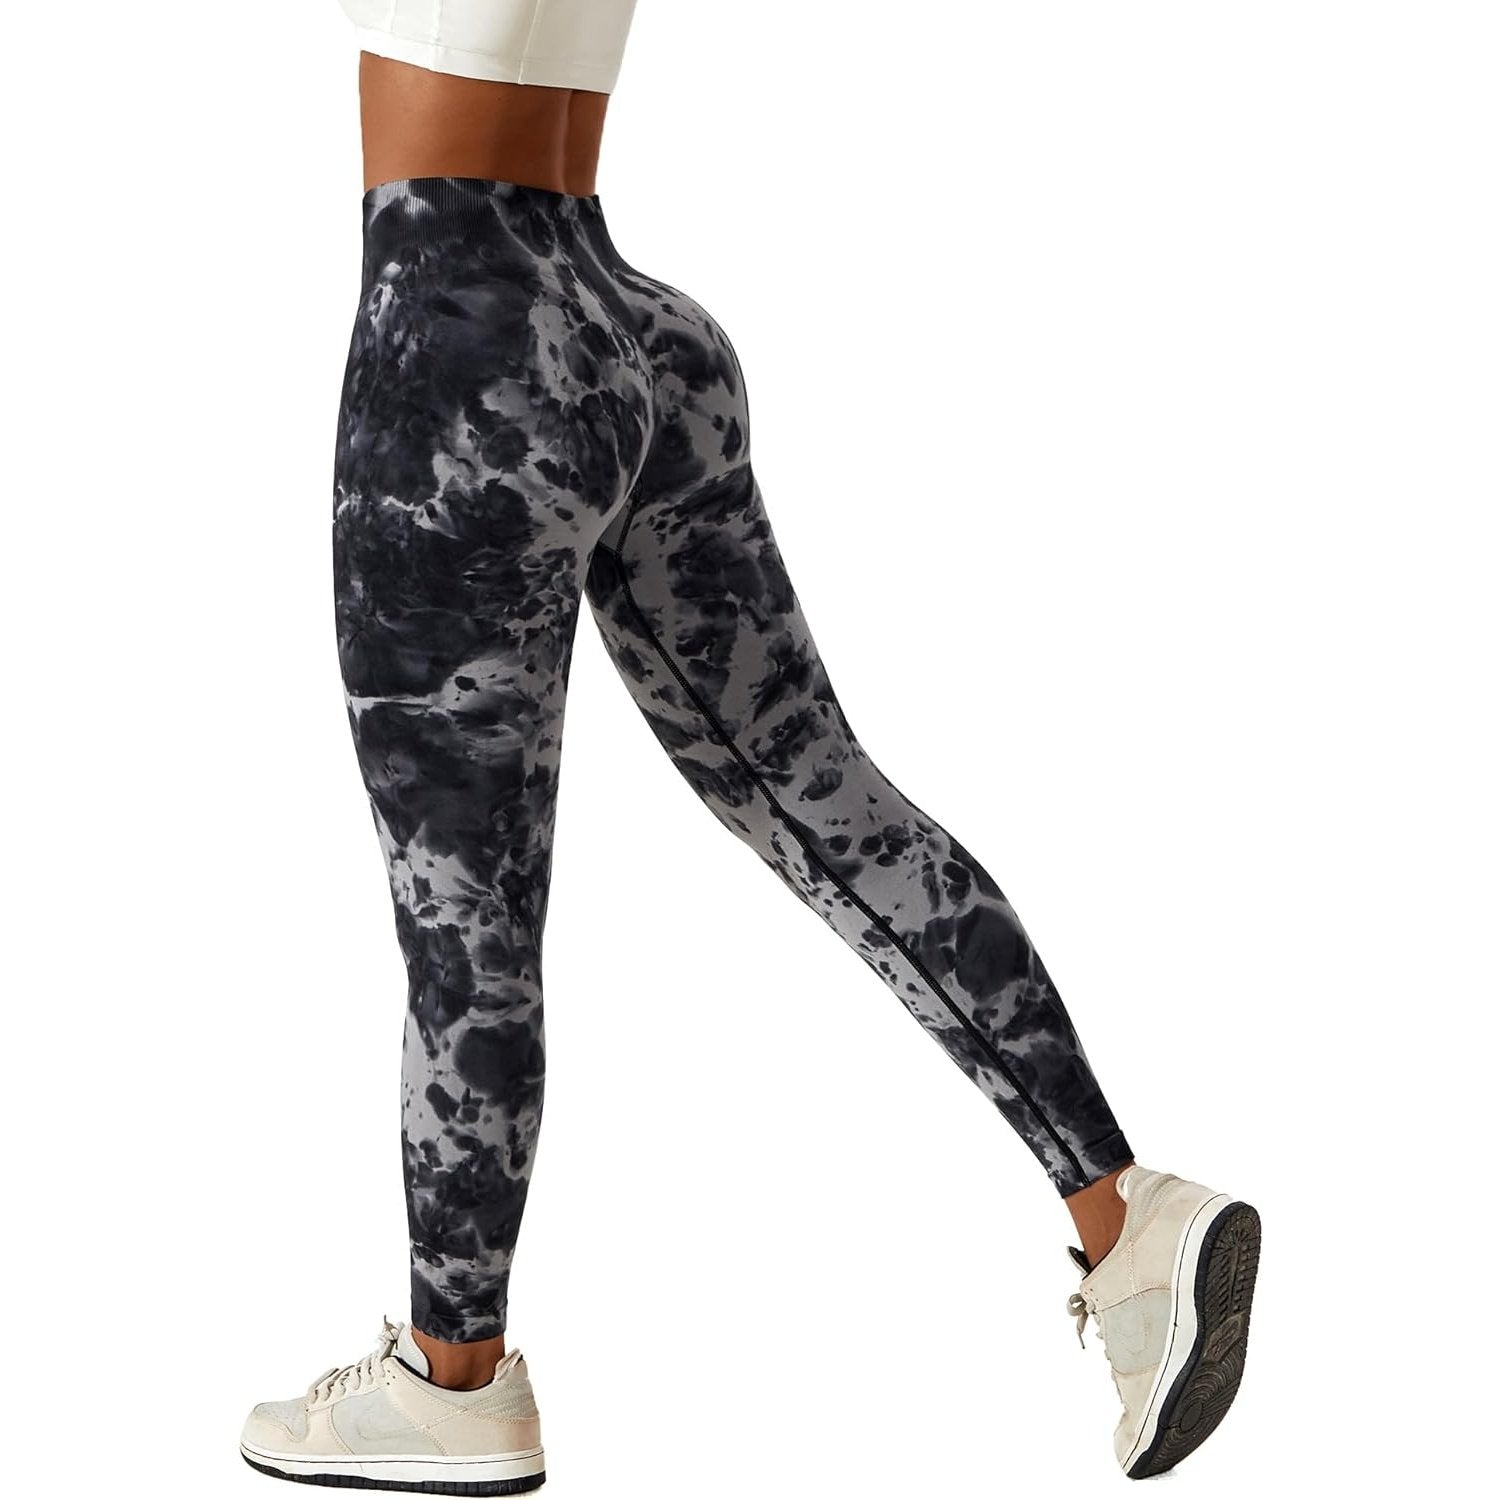 High Waist Naked Feel No Camel Toe Sport Leggings For Women Squatproof Best Yoga  Leggings 2022 For Fitness, Gym, And Athletic Activities Plus Size Available  H1221 From Mengyang10, $18.27